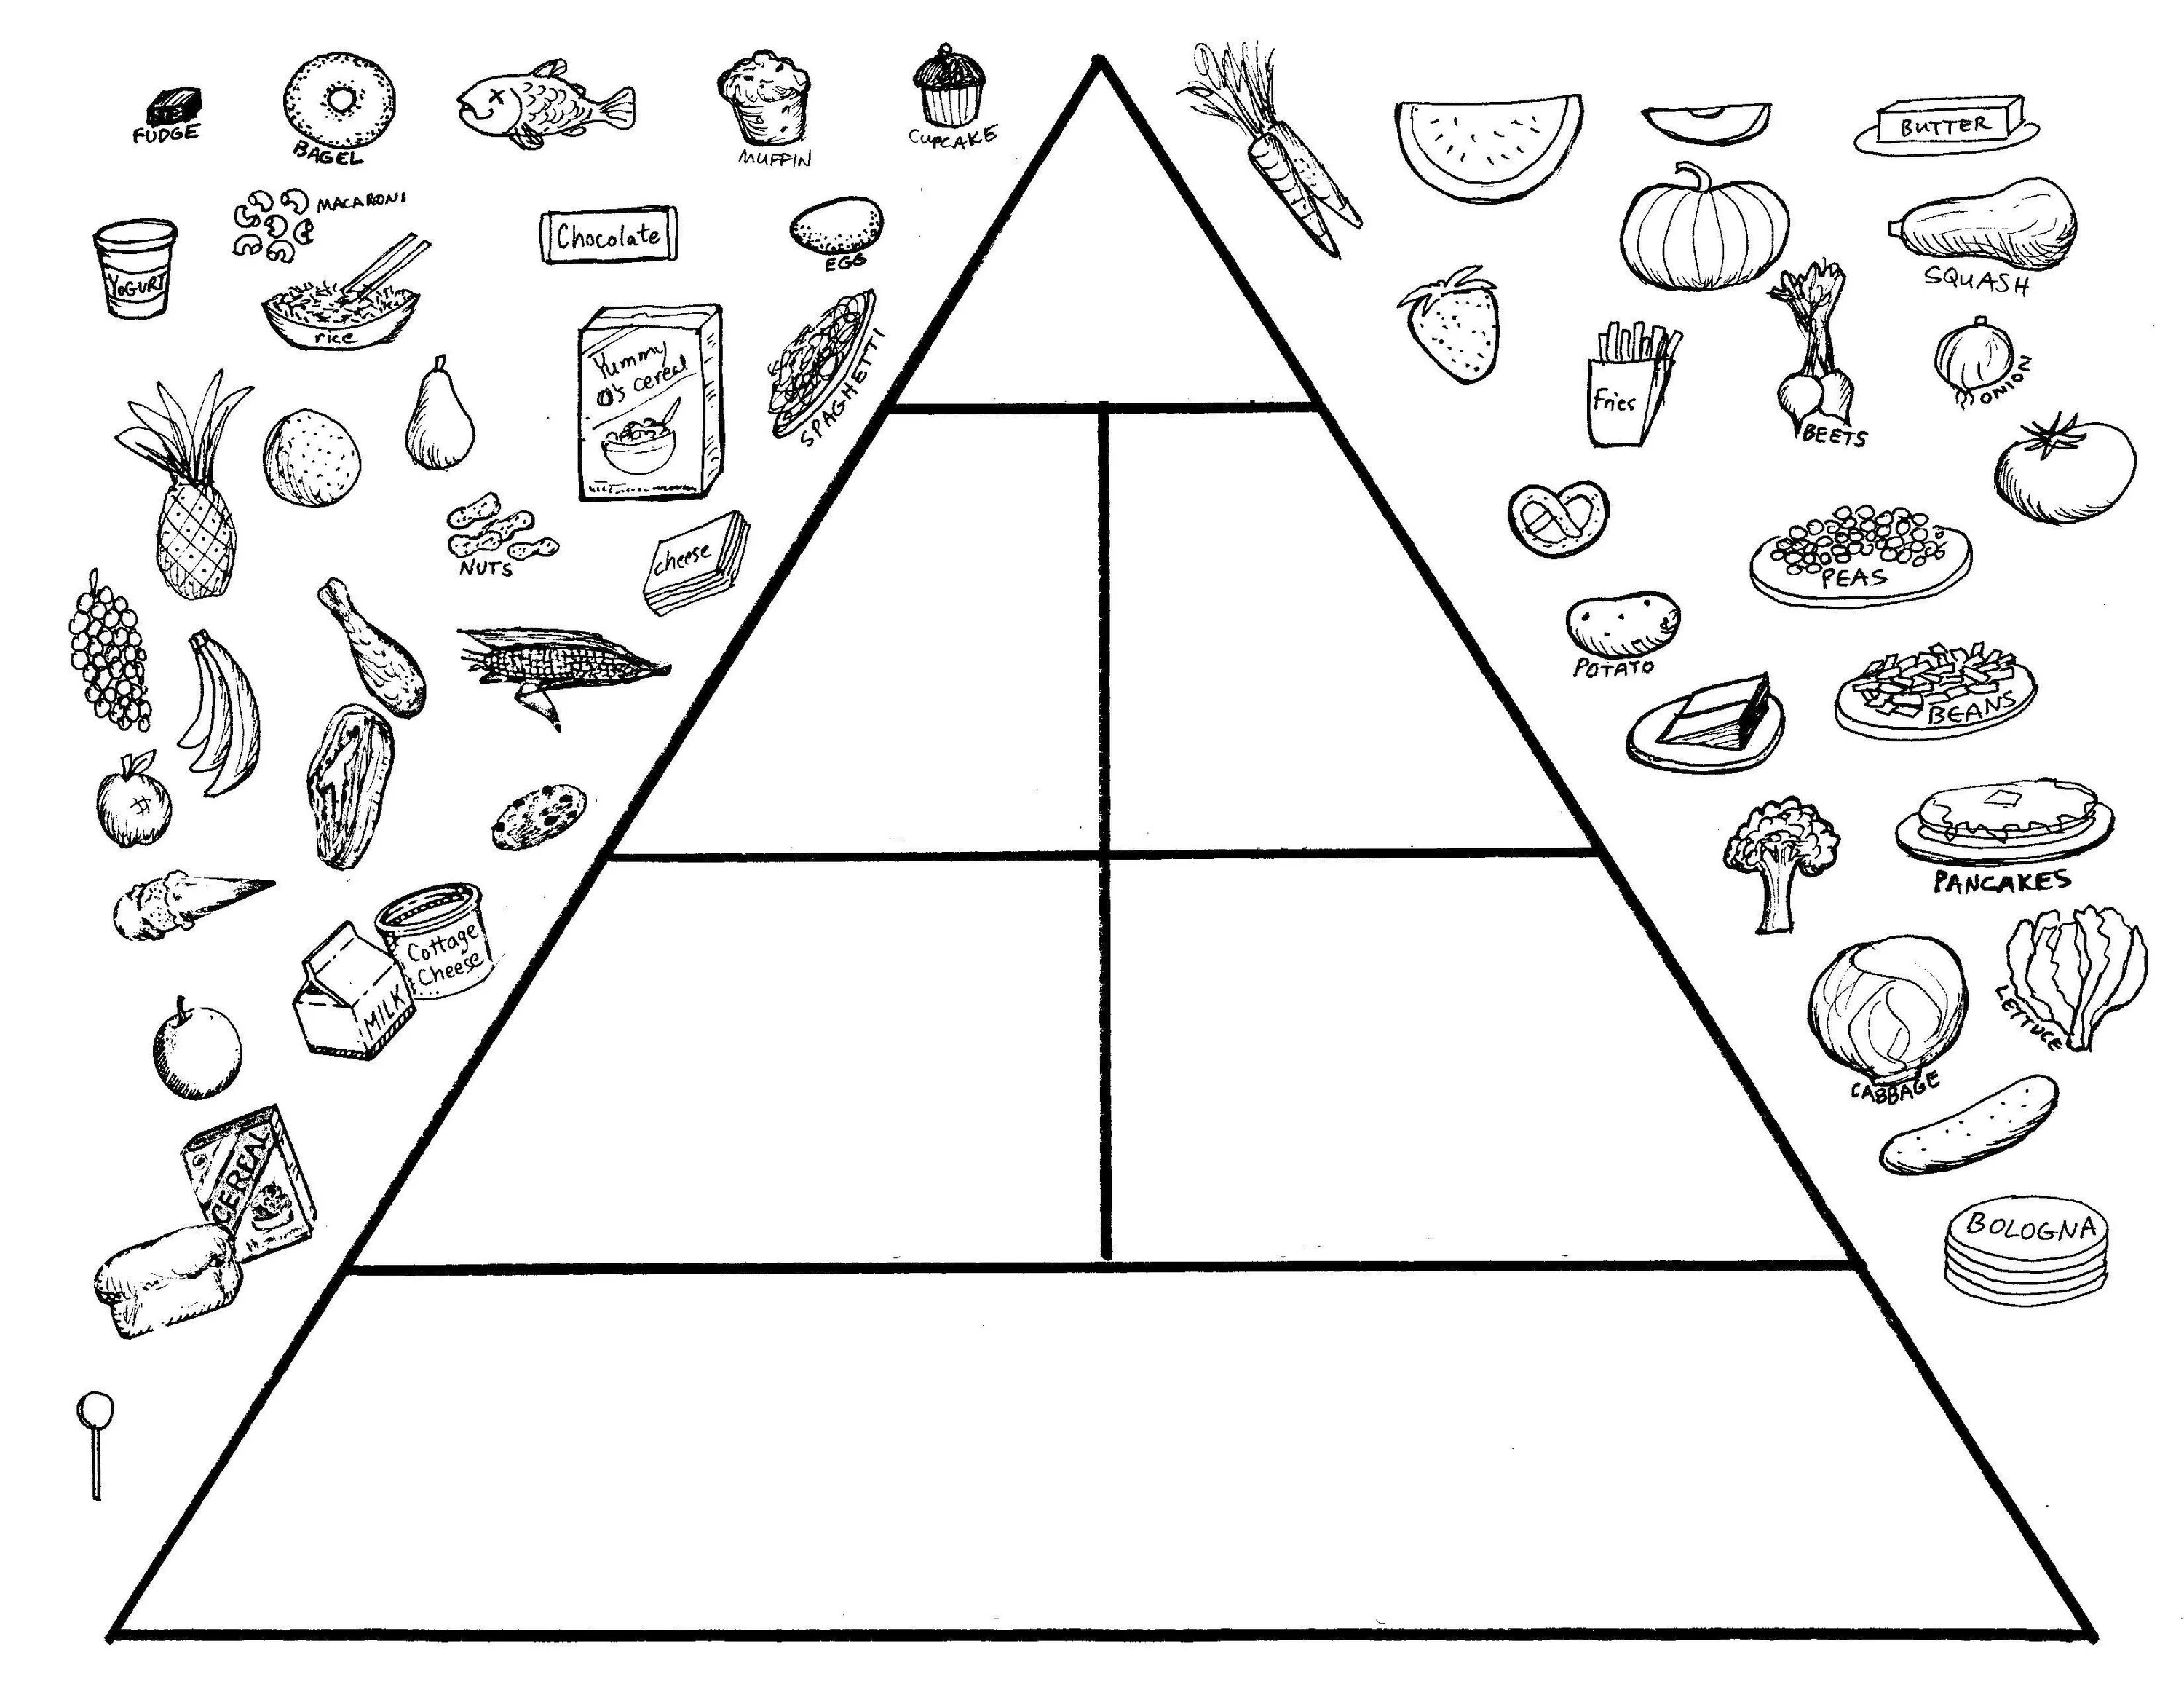 Coloring book special proper nutrition, class 2